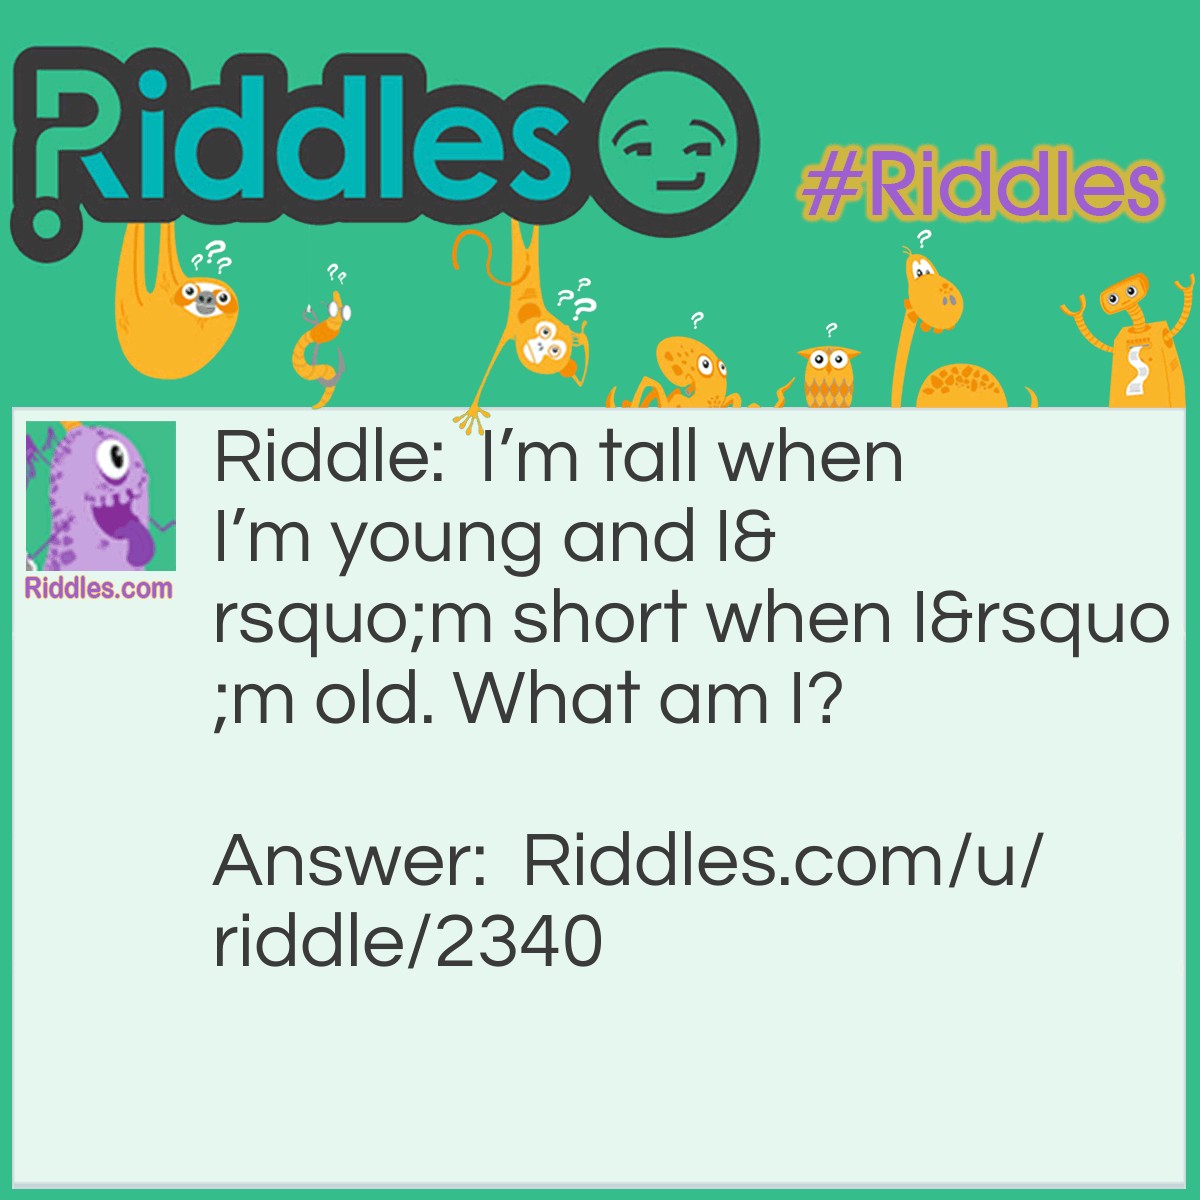 Riddle: I'm tall when I'm young and I'm short when I'm old. What am I? Answer: A candle.